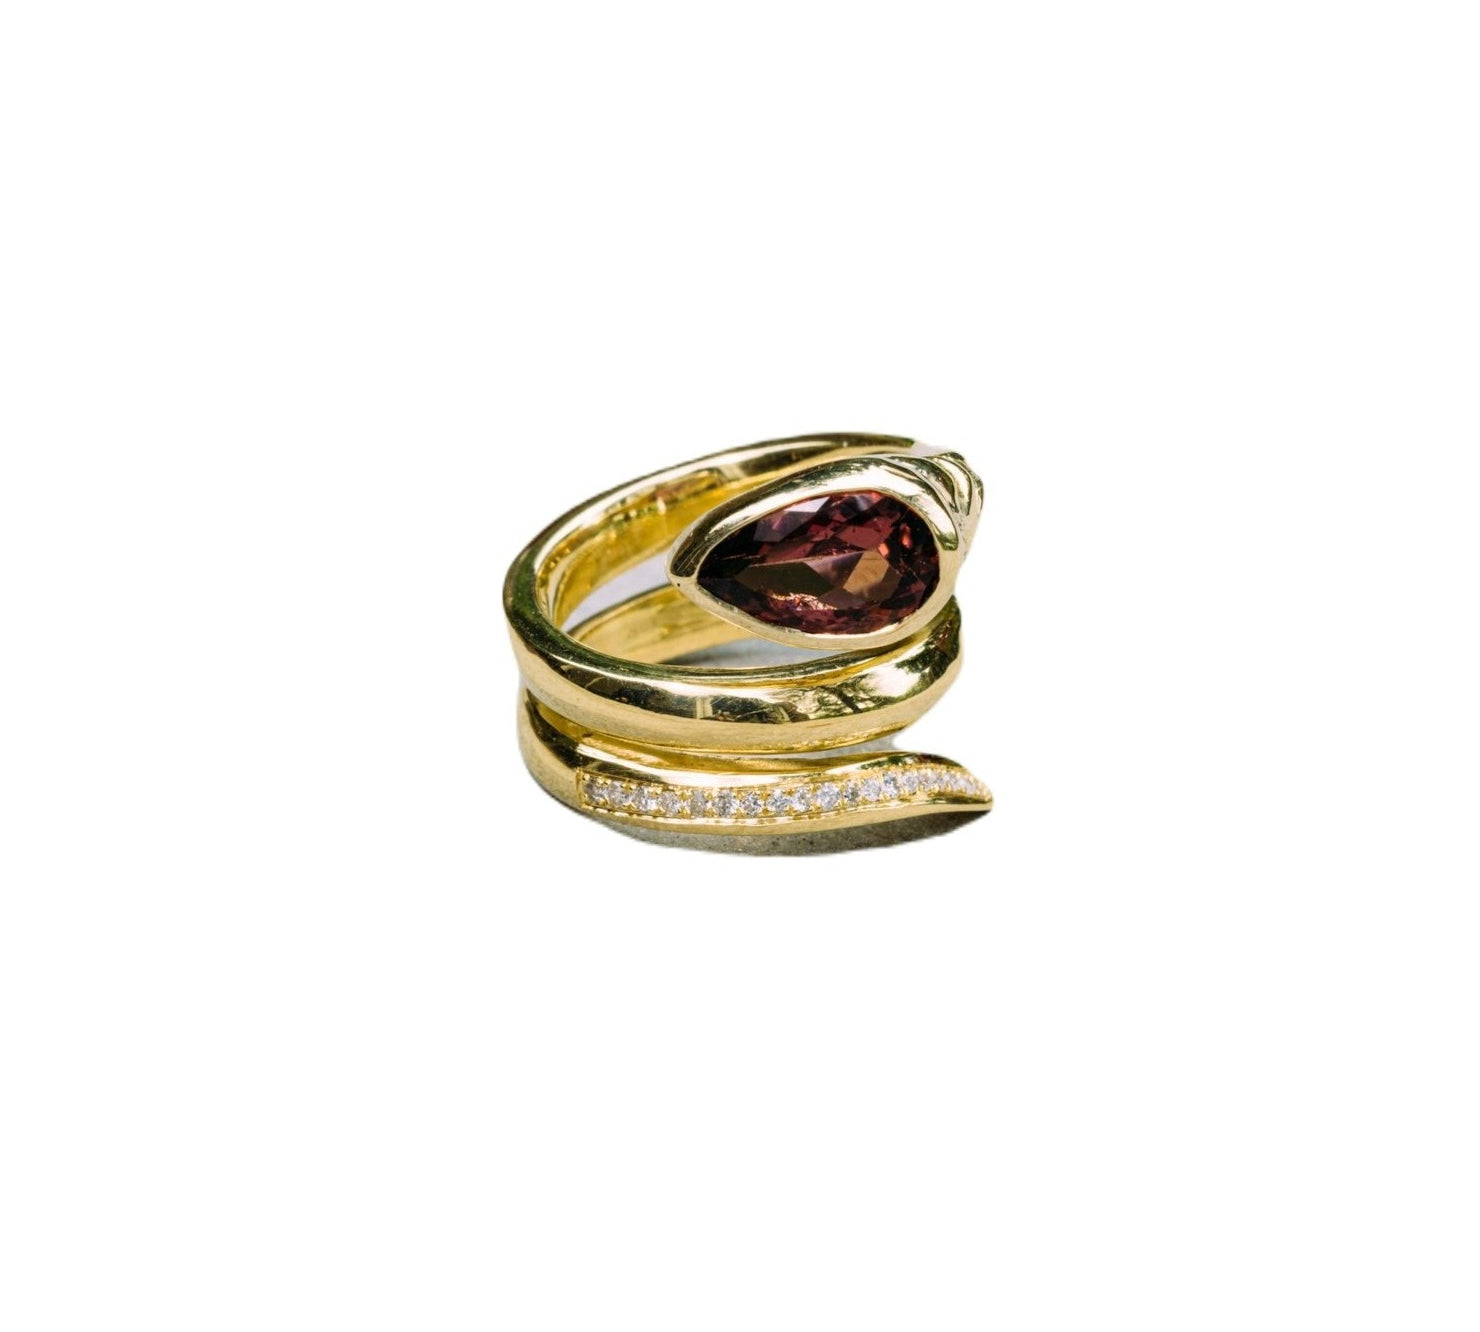 Coiled Serpent Ring, Yellow Gold and Tourmaline Statement Ring House of RAVN   